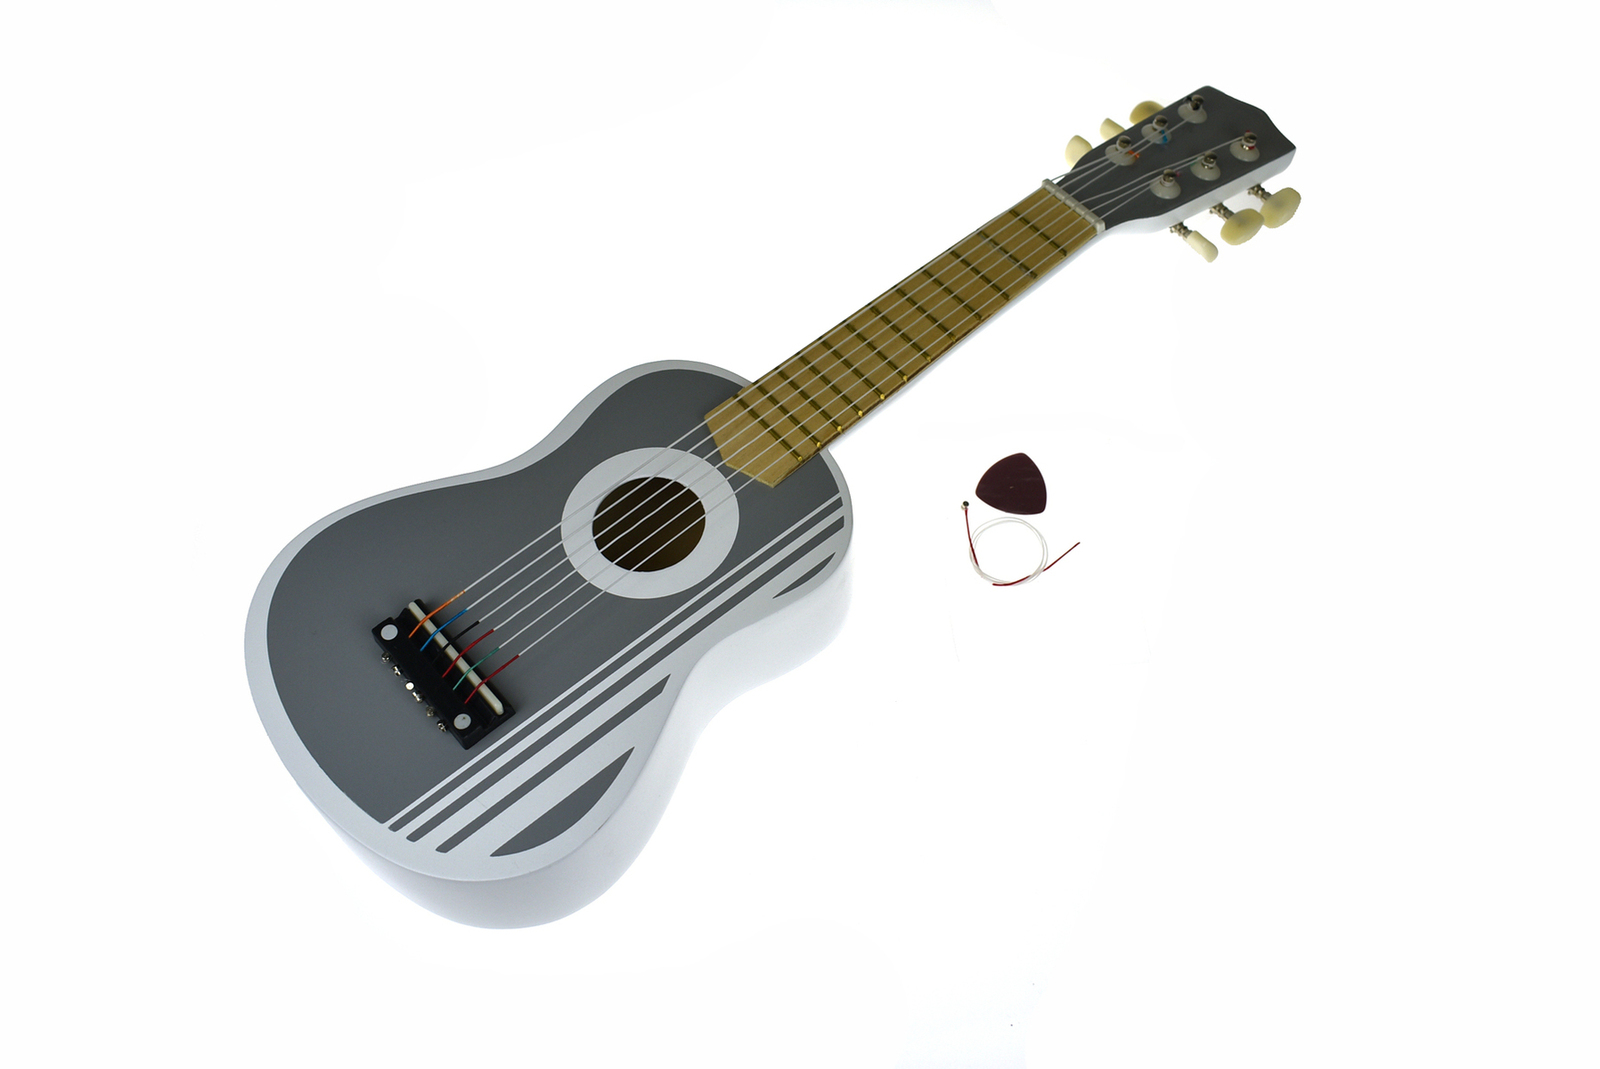 Wooden Toy Guitar for kids